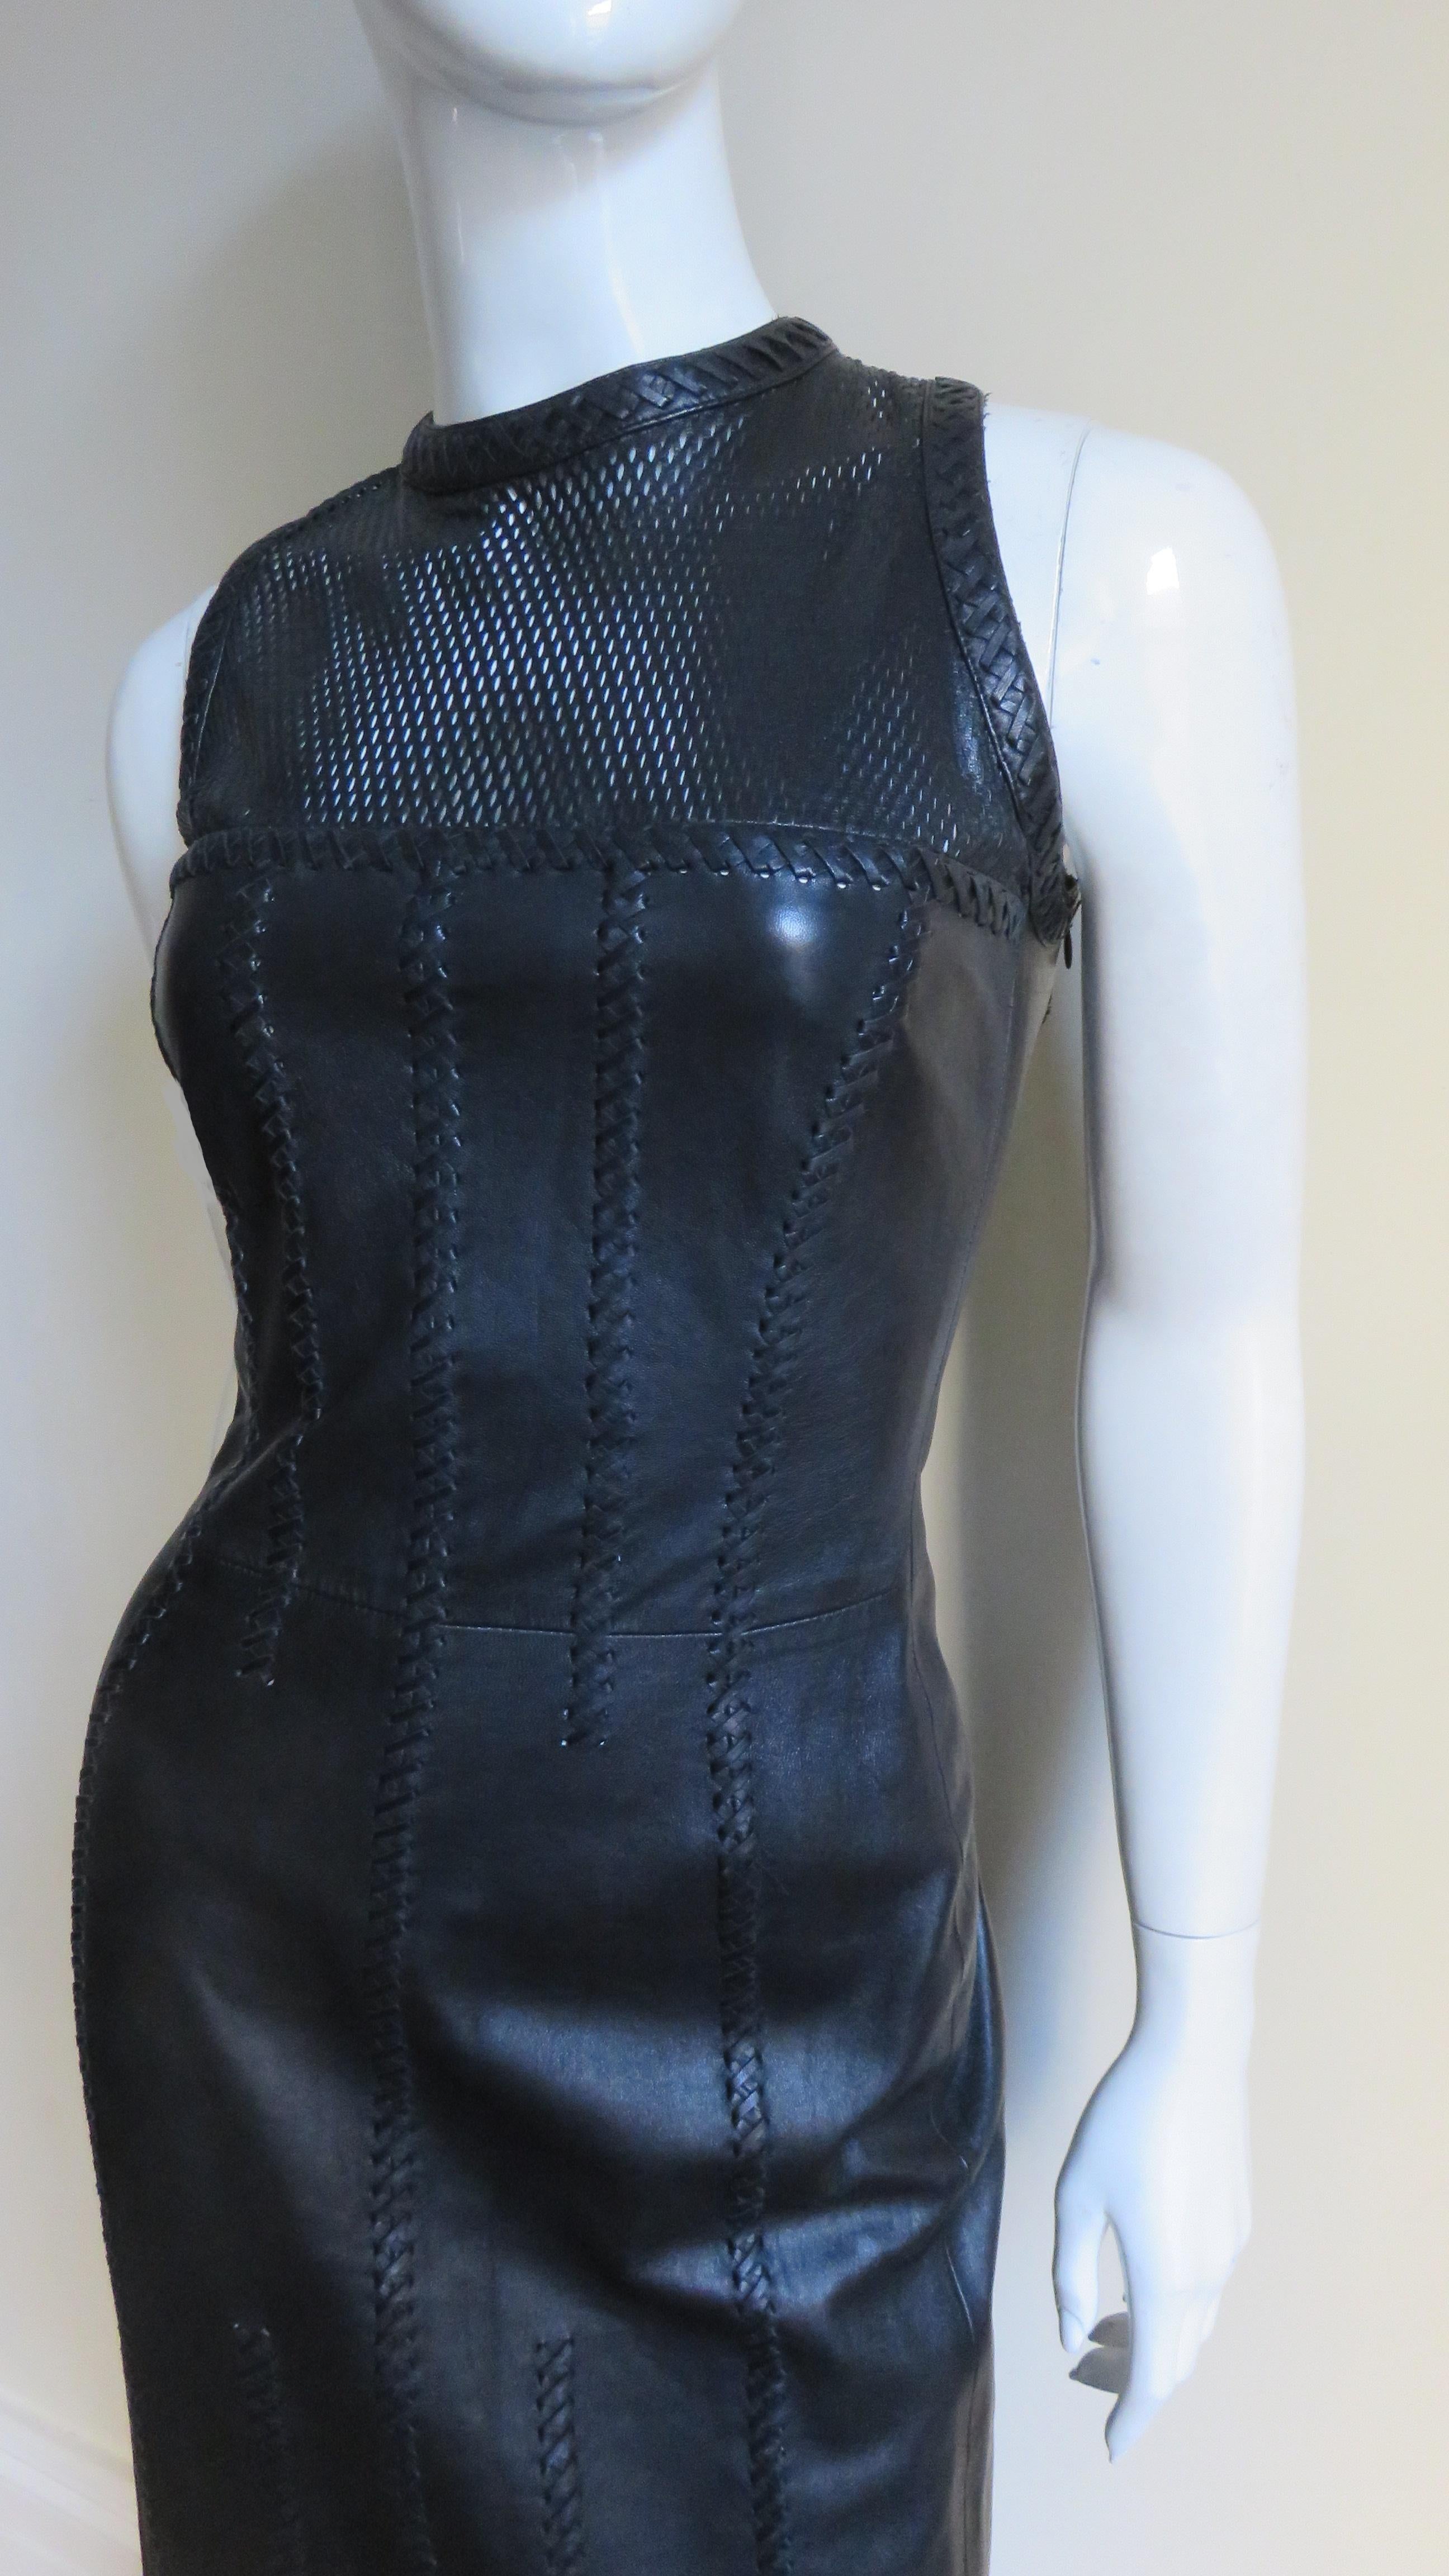  Gianni Versace Leather Lace up Dress S/S 2002 In Excellent Condition For Sale In Water Mill, NY